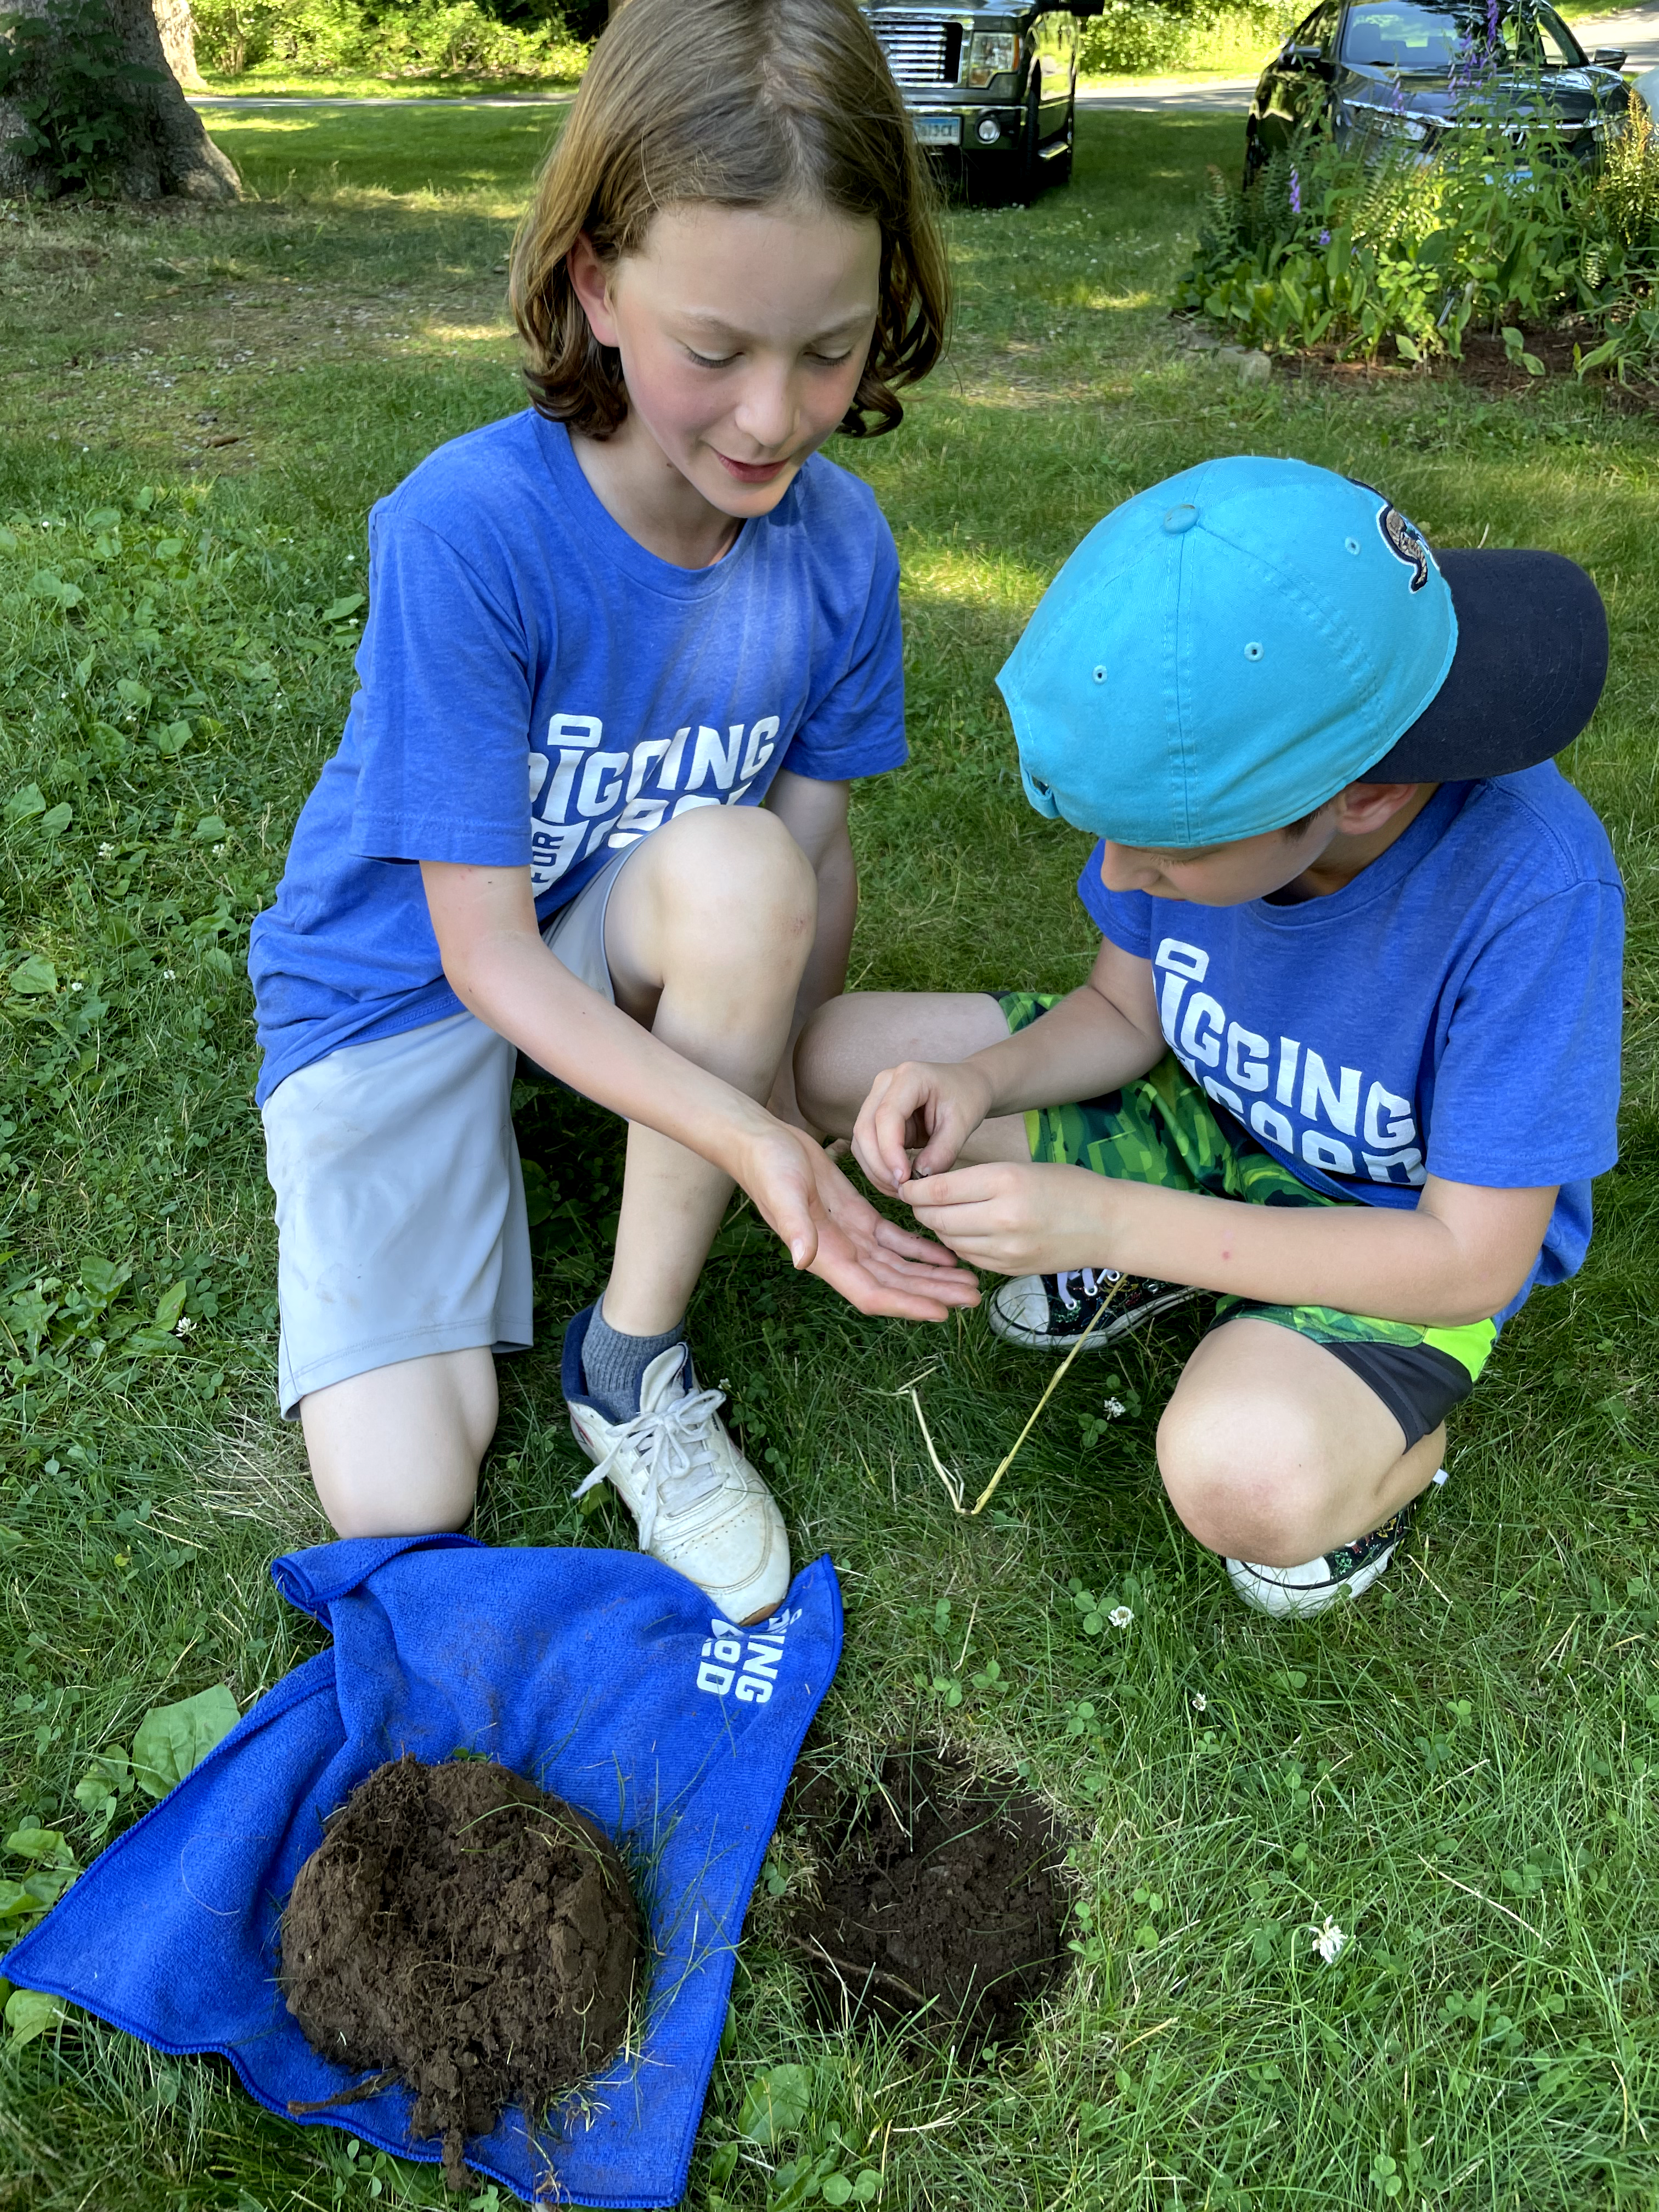 Kids with finds from metal detecting